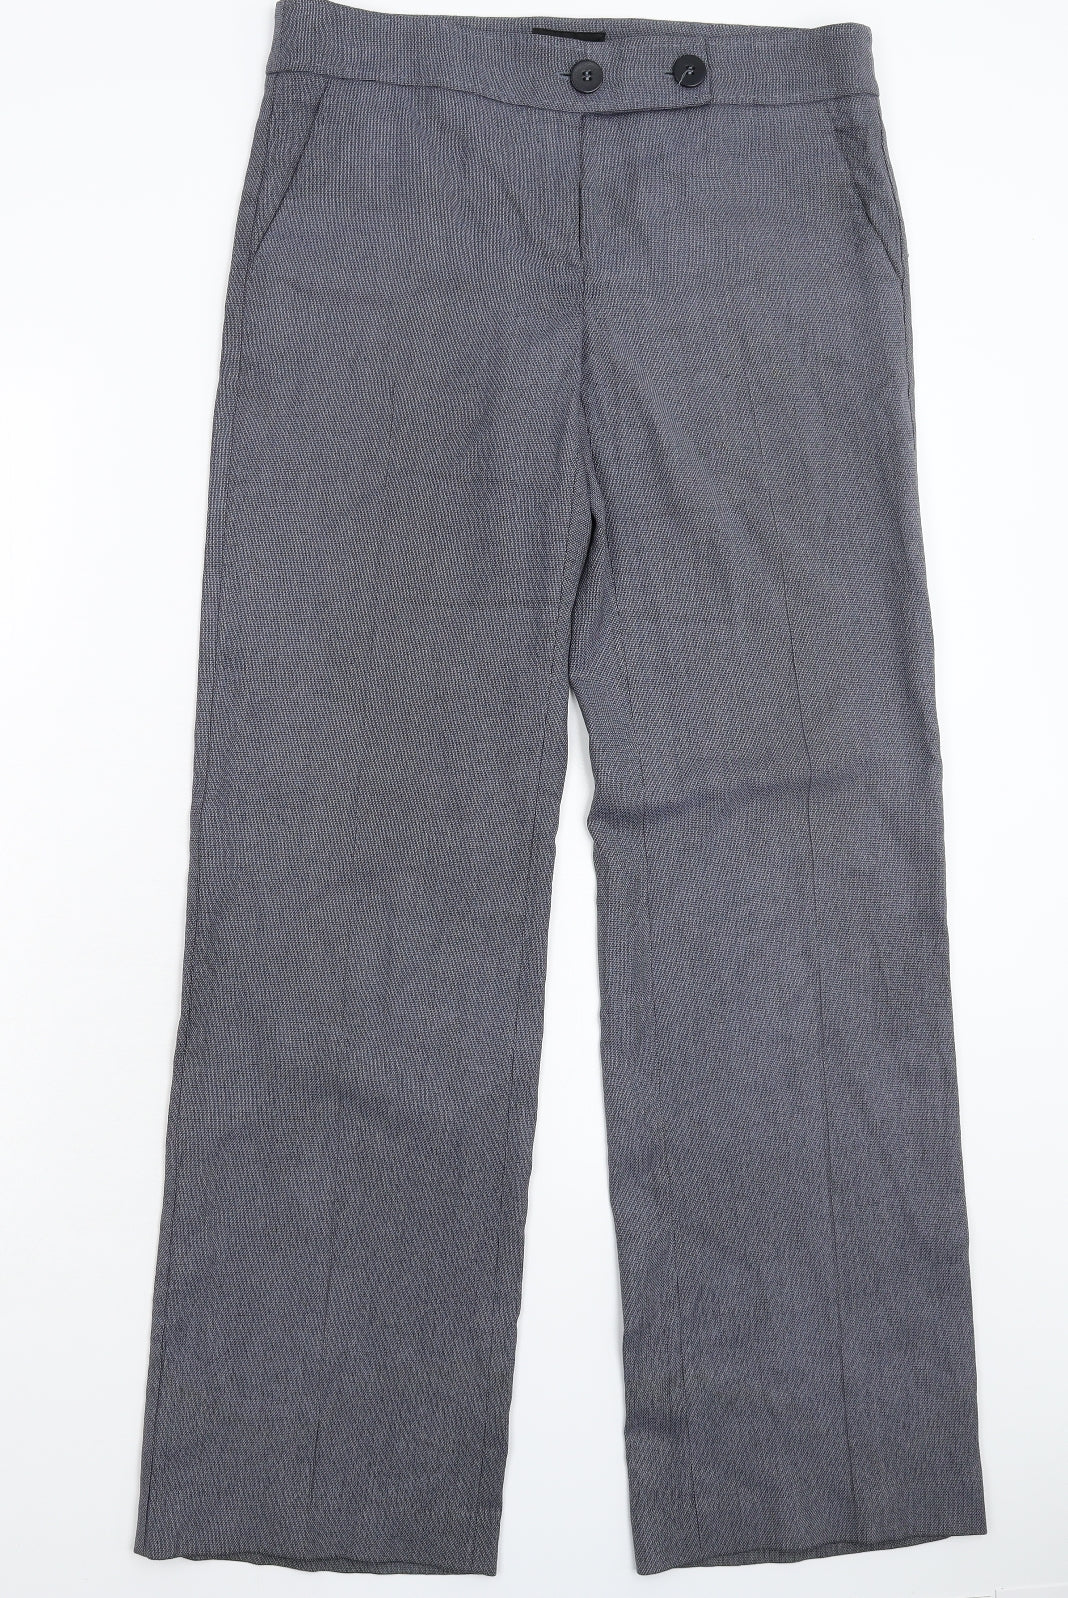 Emporio Armani Womens Blue   Dress Pants Trousers Size 34 in L33 in